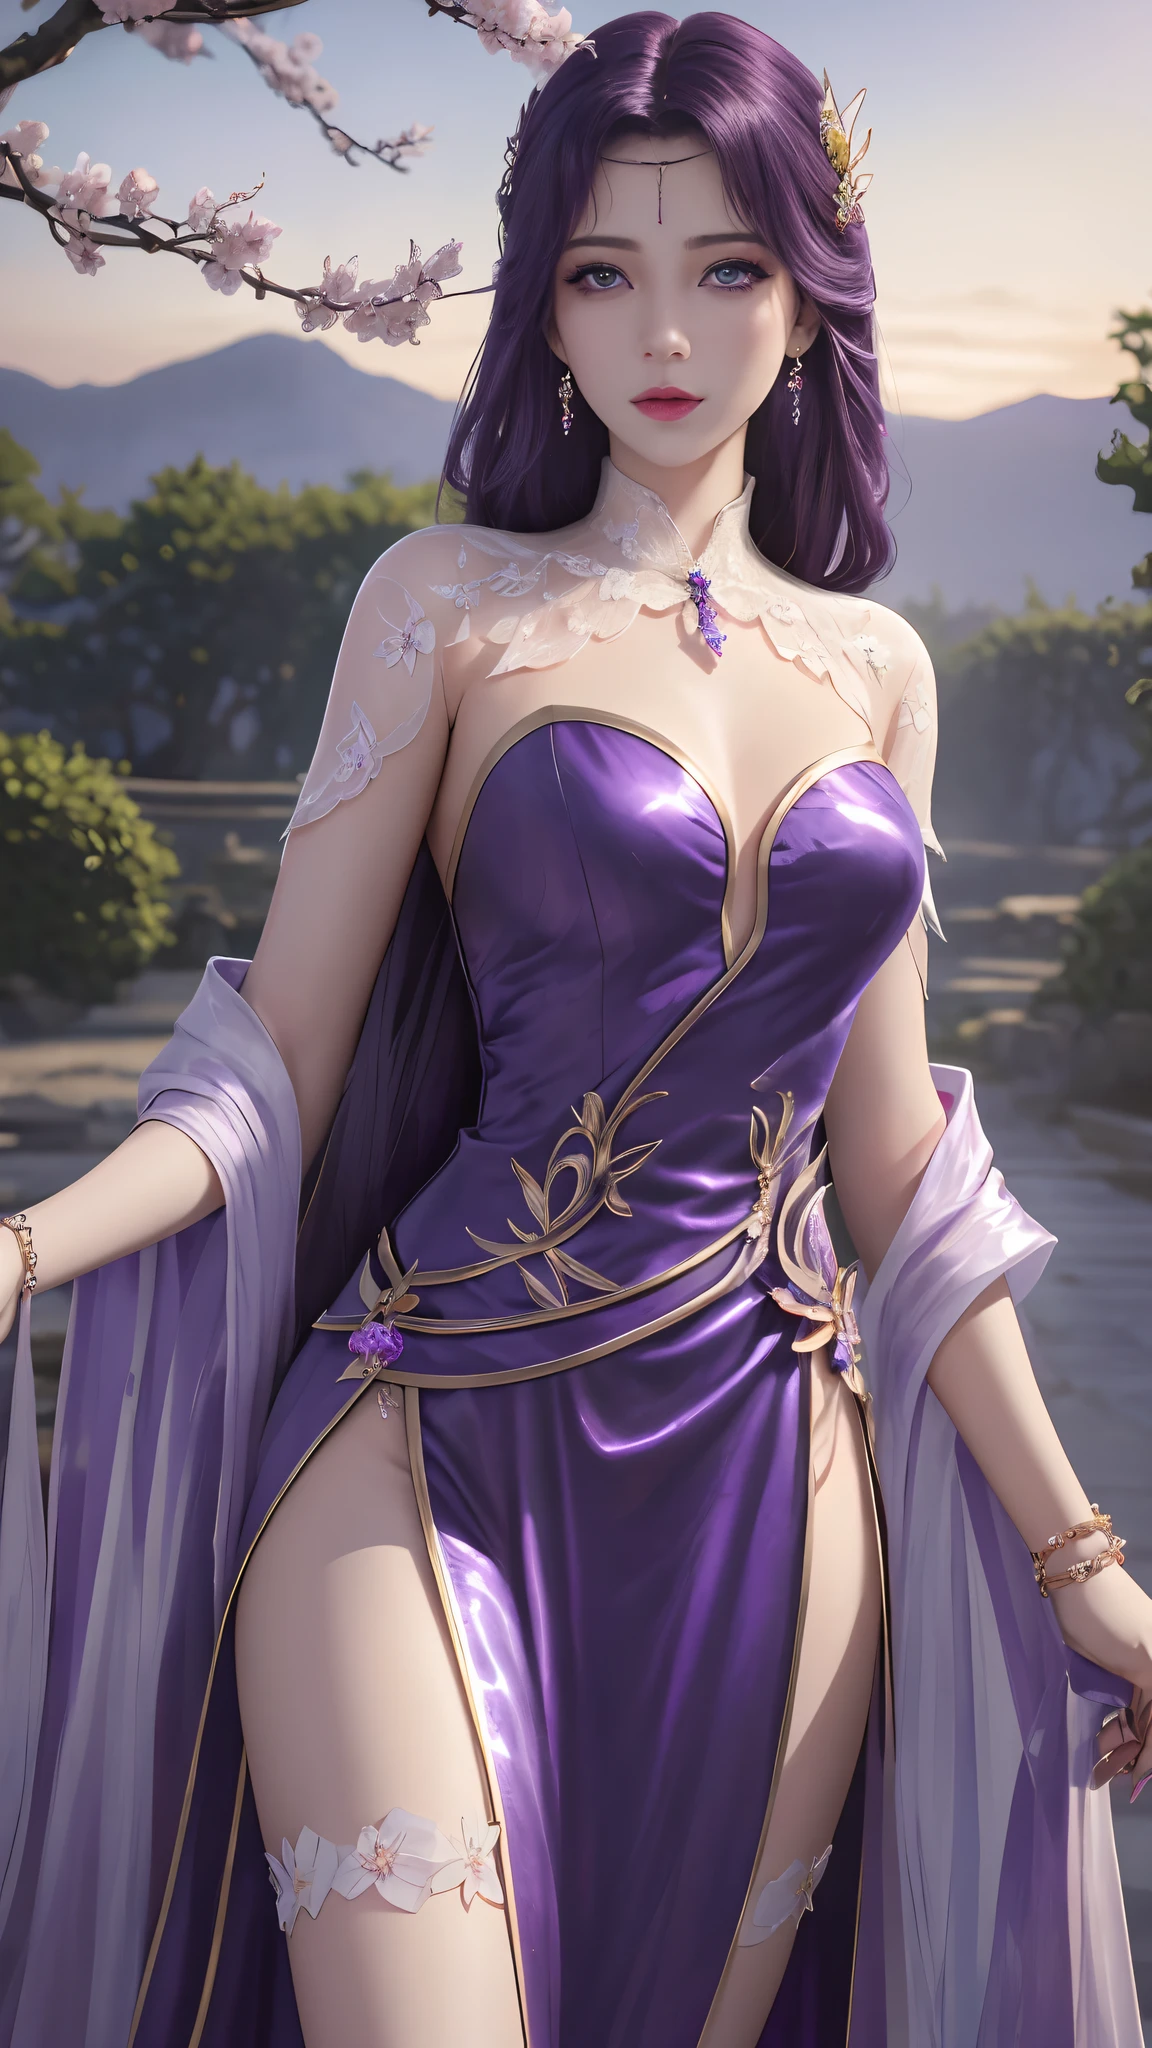 (,1girll, angle of view,Best quality, ) , (((,1girll, Solo,, view the viewer, Cherry blossoms,   , purple_Hair, purple_Eyes, Long_Hair, Solo, Cloud, jewelry, dress, Sunset, sky ))) ultra realistic 8k cg, Flawless, Clean, Masterpiece, Professional artwork, Famous artwork, Cinematic lighting, Cinematic bloom, Perfect face, Beautiful face,,fantasy, smallunderboob，The upper part of the body，Dreamlike, unreal, Science fiction, Lace, Lace trim, lace-trimmed legwear, luxury goods, jewelry, Diamond, gold, the pearl, Pedras preciosas, Sapphire, Ruby, Emerald, intricately details, Delicate pattern, Charming, Alluring, Seductive, Erotic, Enchanting, hair adornments, necklace, Earrings, Bracelet, armlets,Halo,Autumn,dynamicposes。